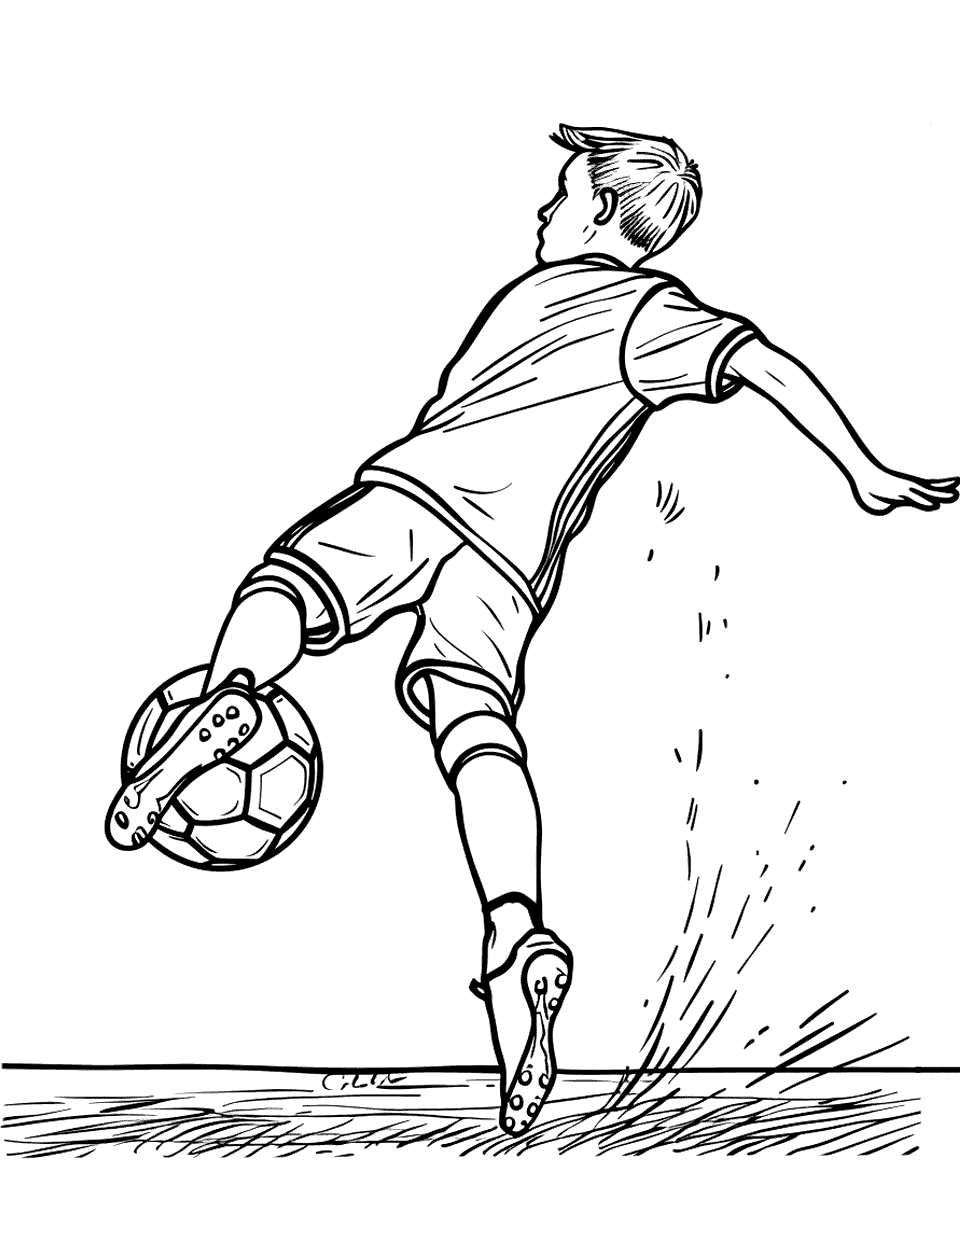 Corner Kick Soccer Coloring Page - A player taking a corner kick with concentration.